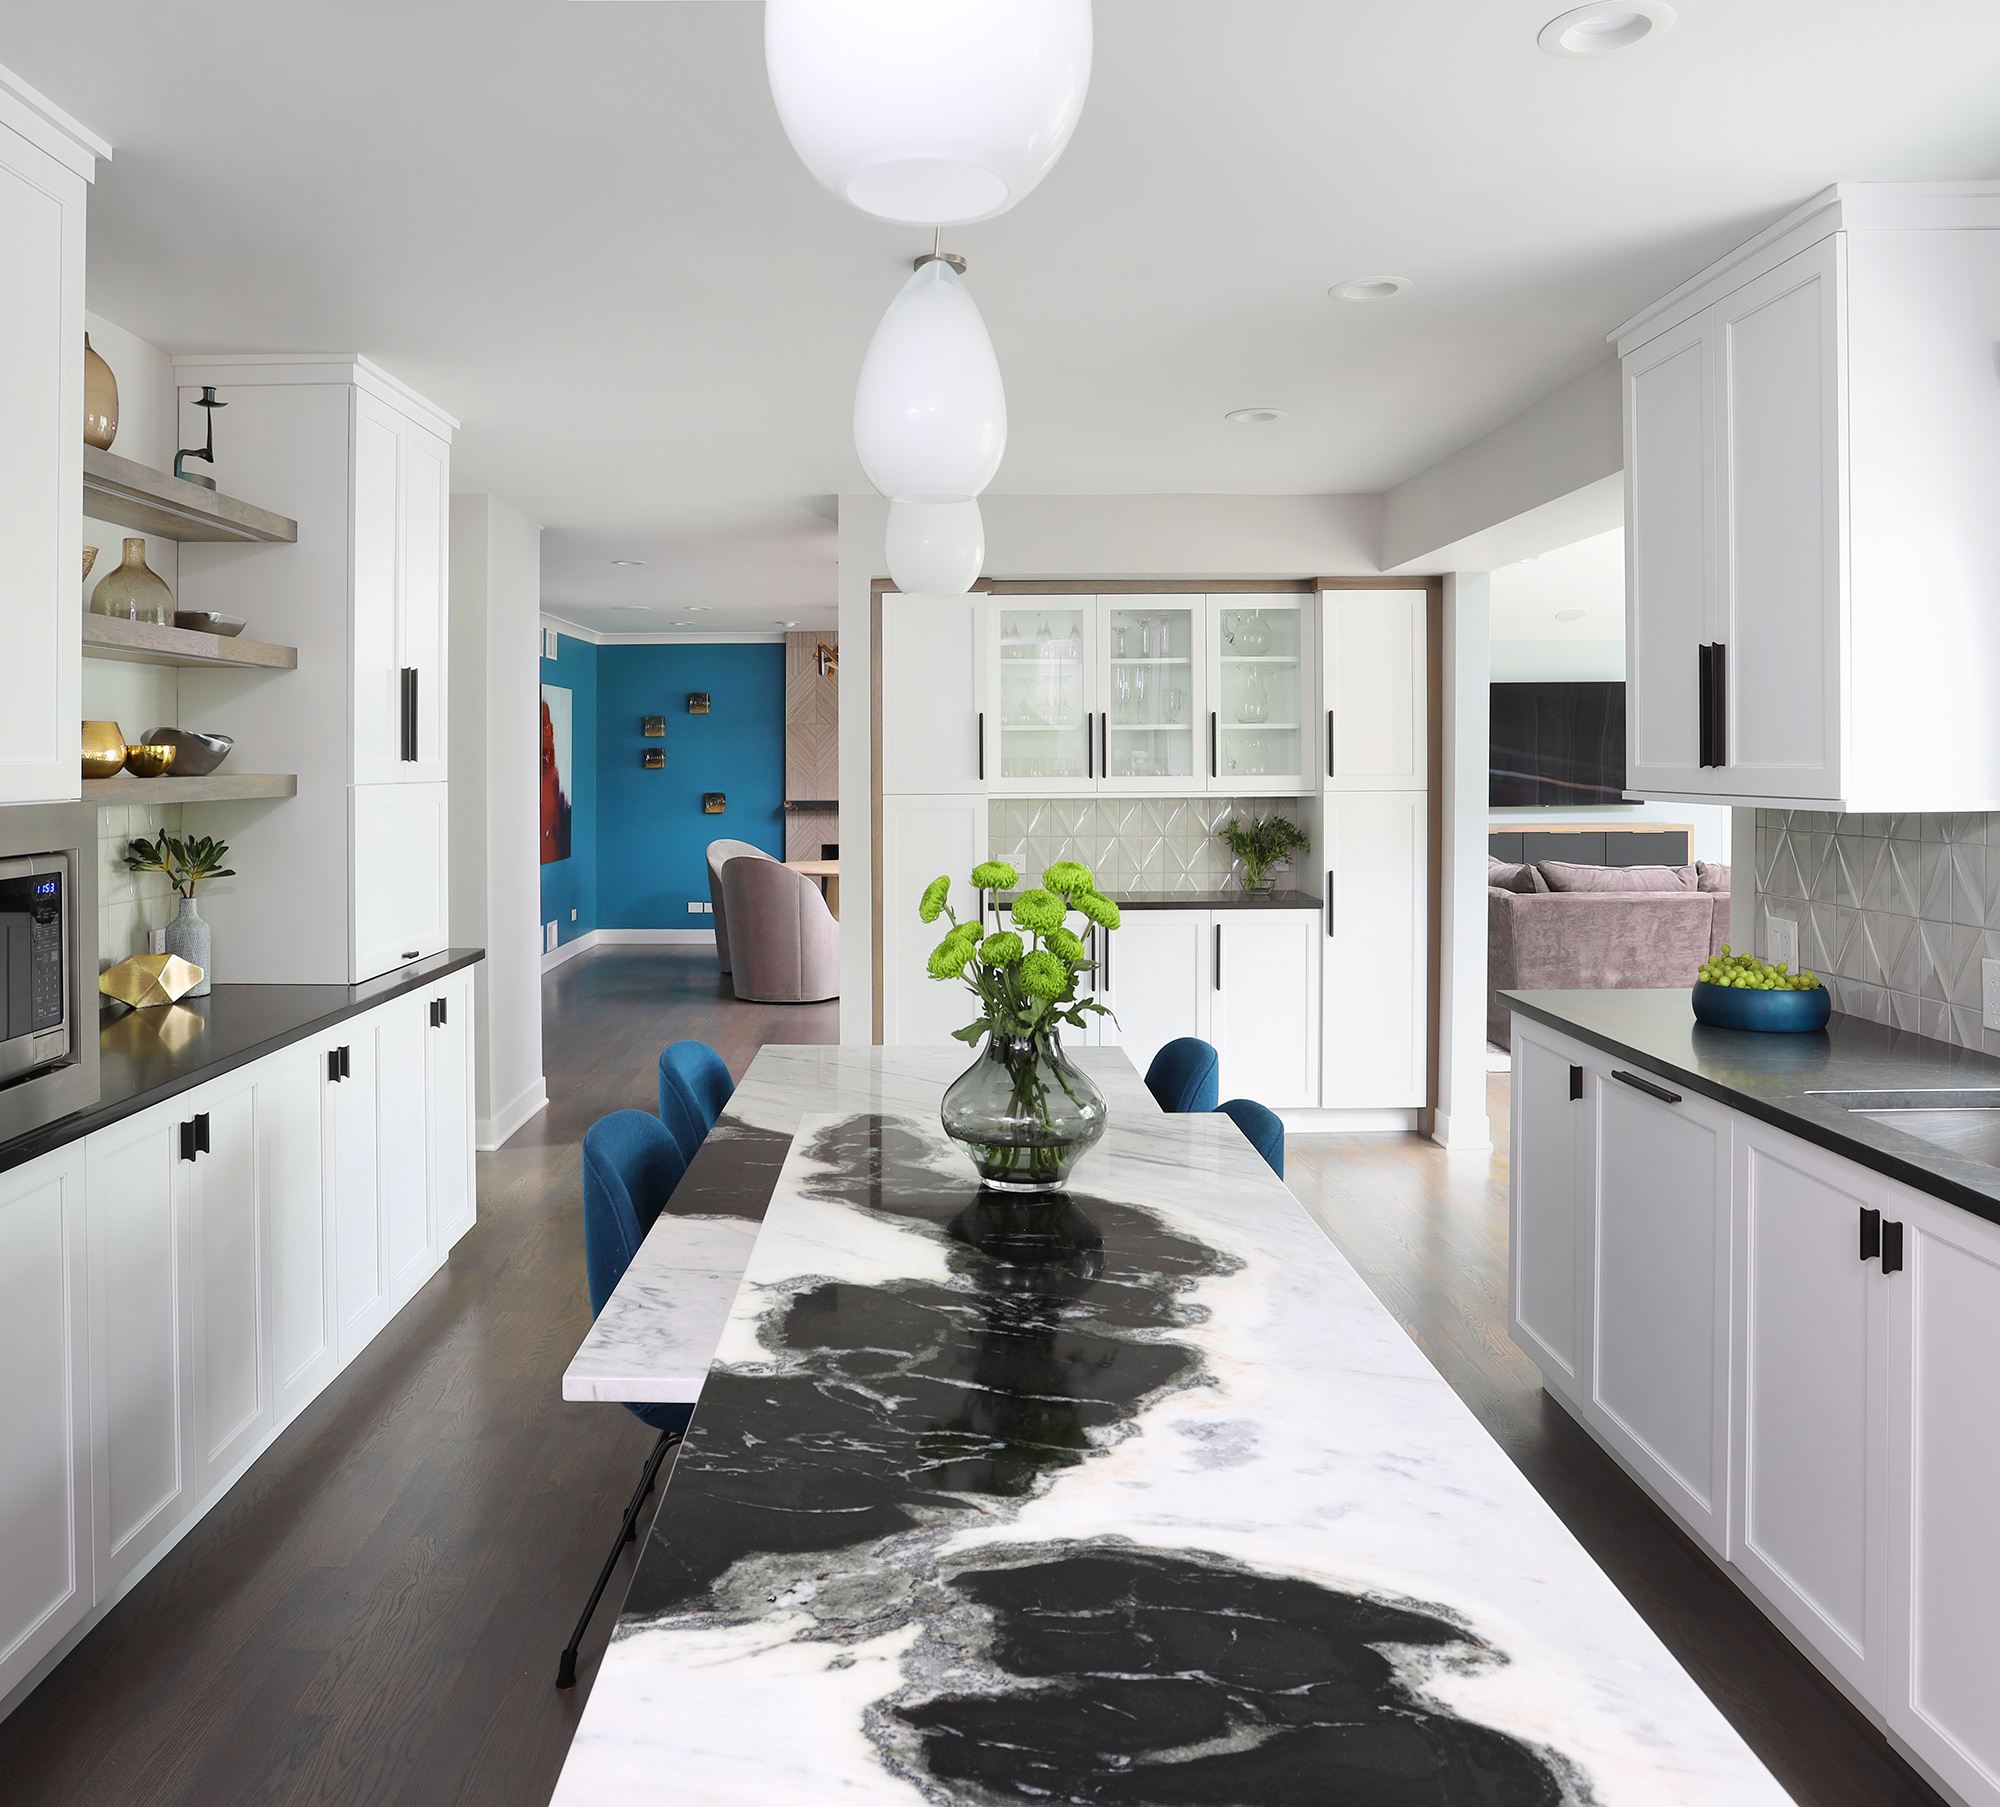 black and white Orca pattern island in contemporary kitchen